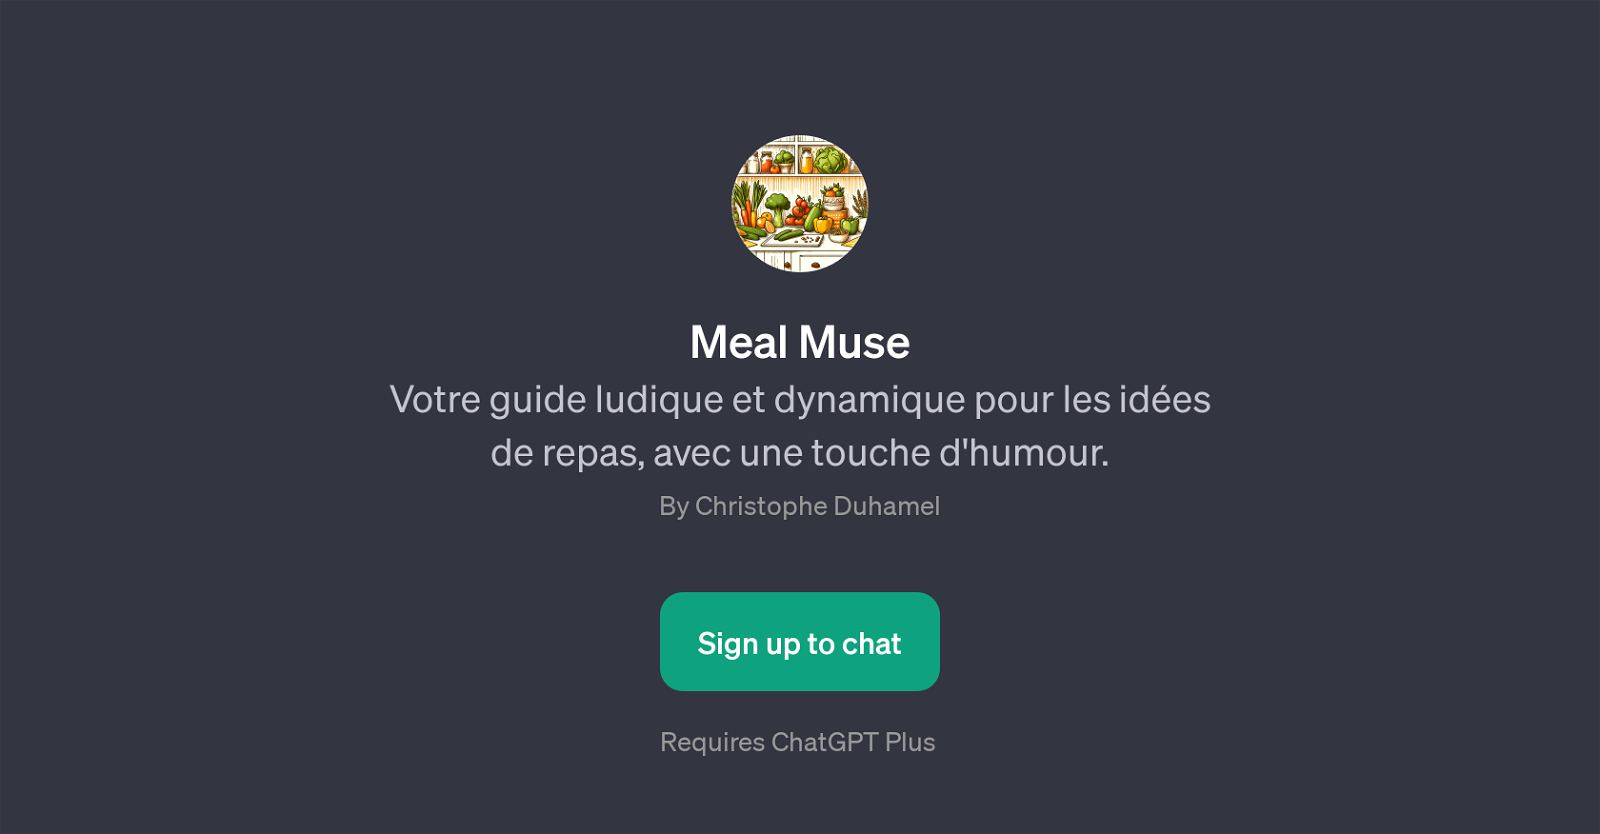 Meal Muse website